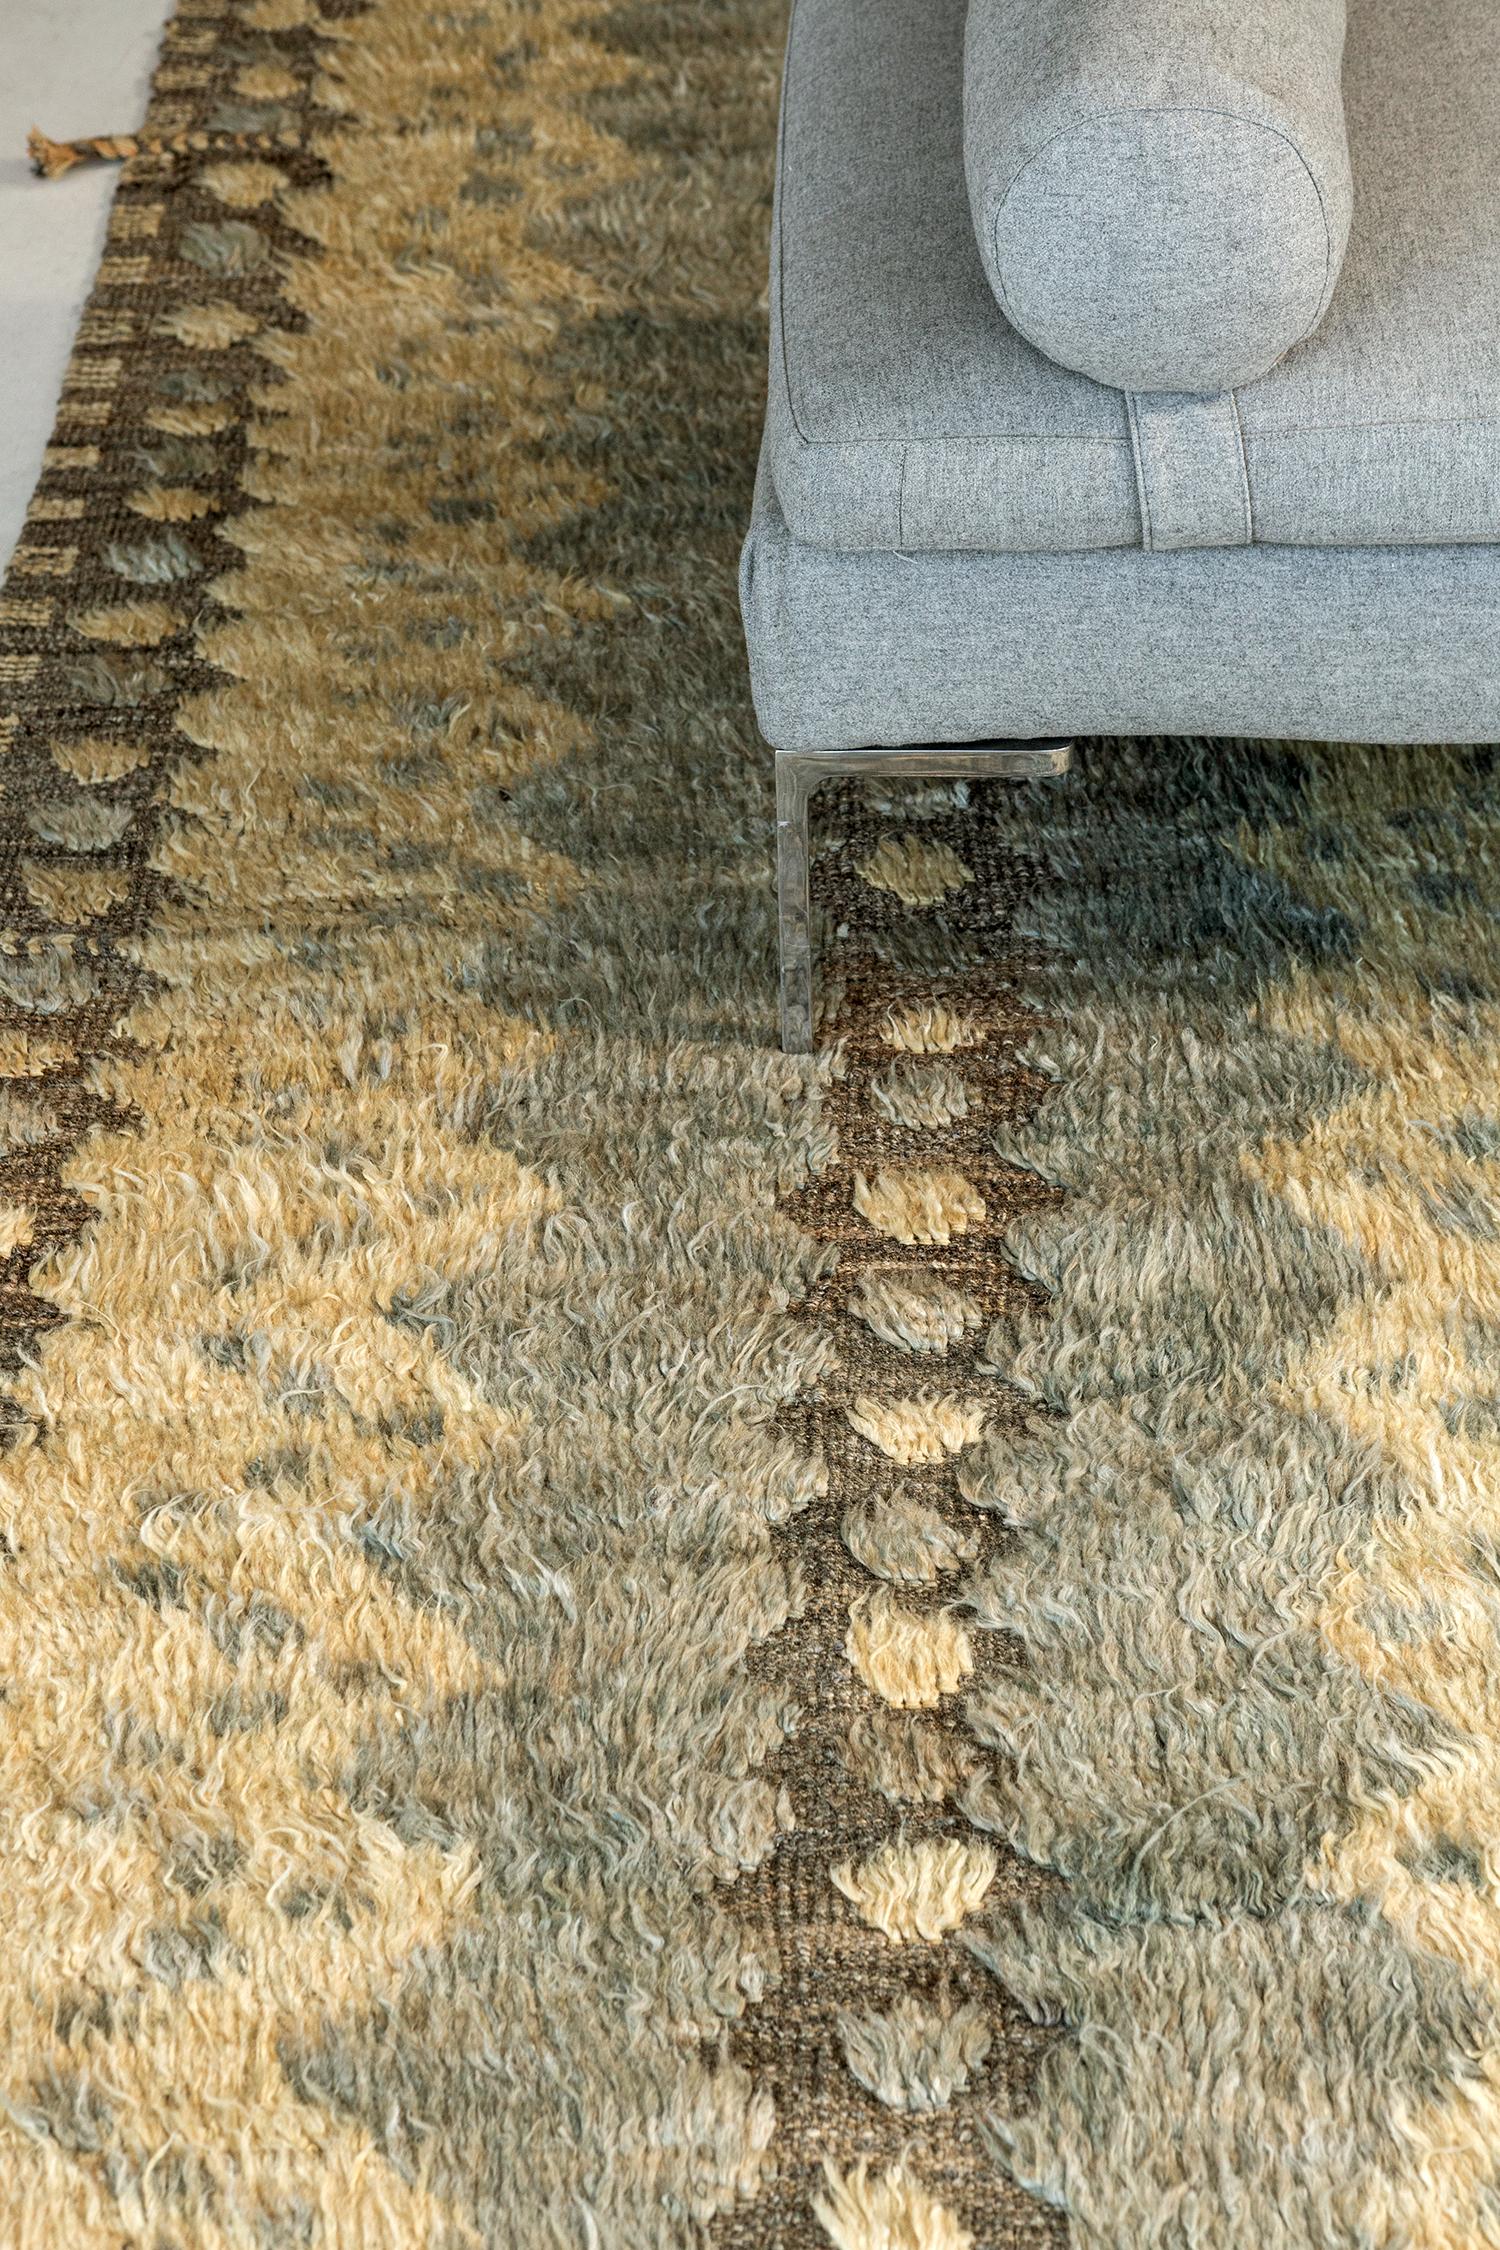 Nazmiyal Collection Elegant Geometric Textured Modern Distressed Rug, Country of Origin: Afghanistan, Circa Date: Modern – This year, designers favor colors that make us feel warm and cozy. Textiles are used to add texture to the space and create a